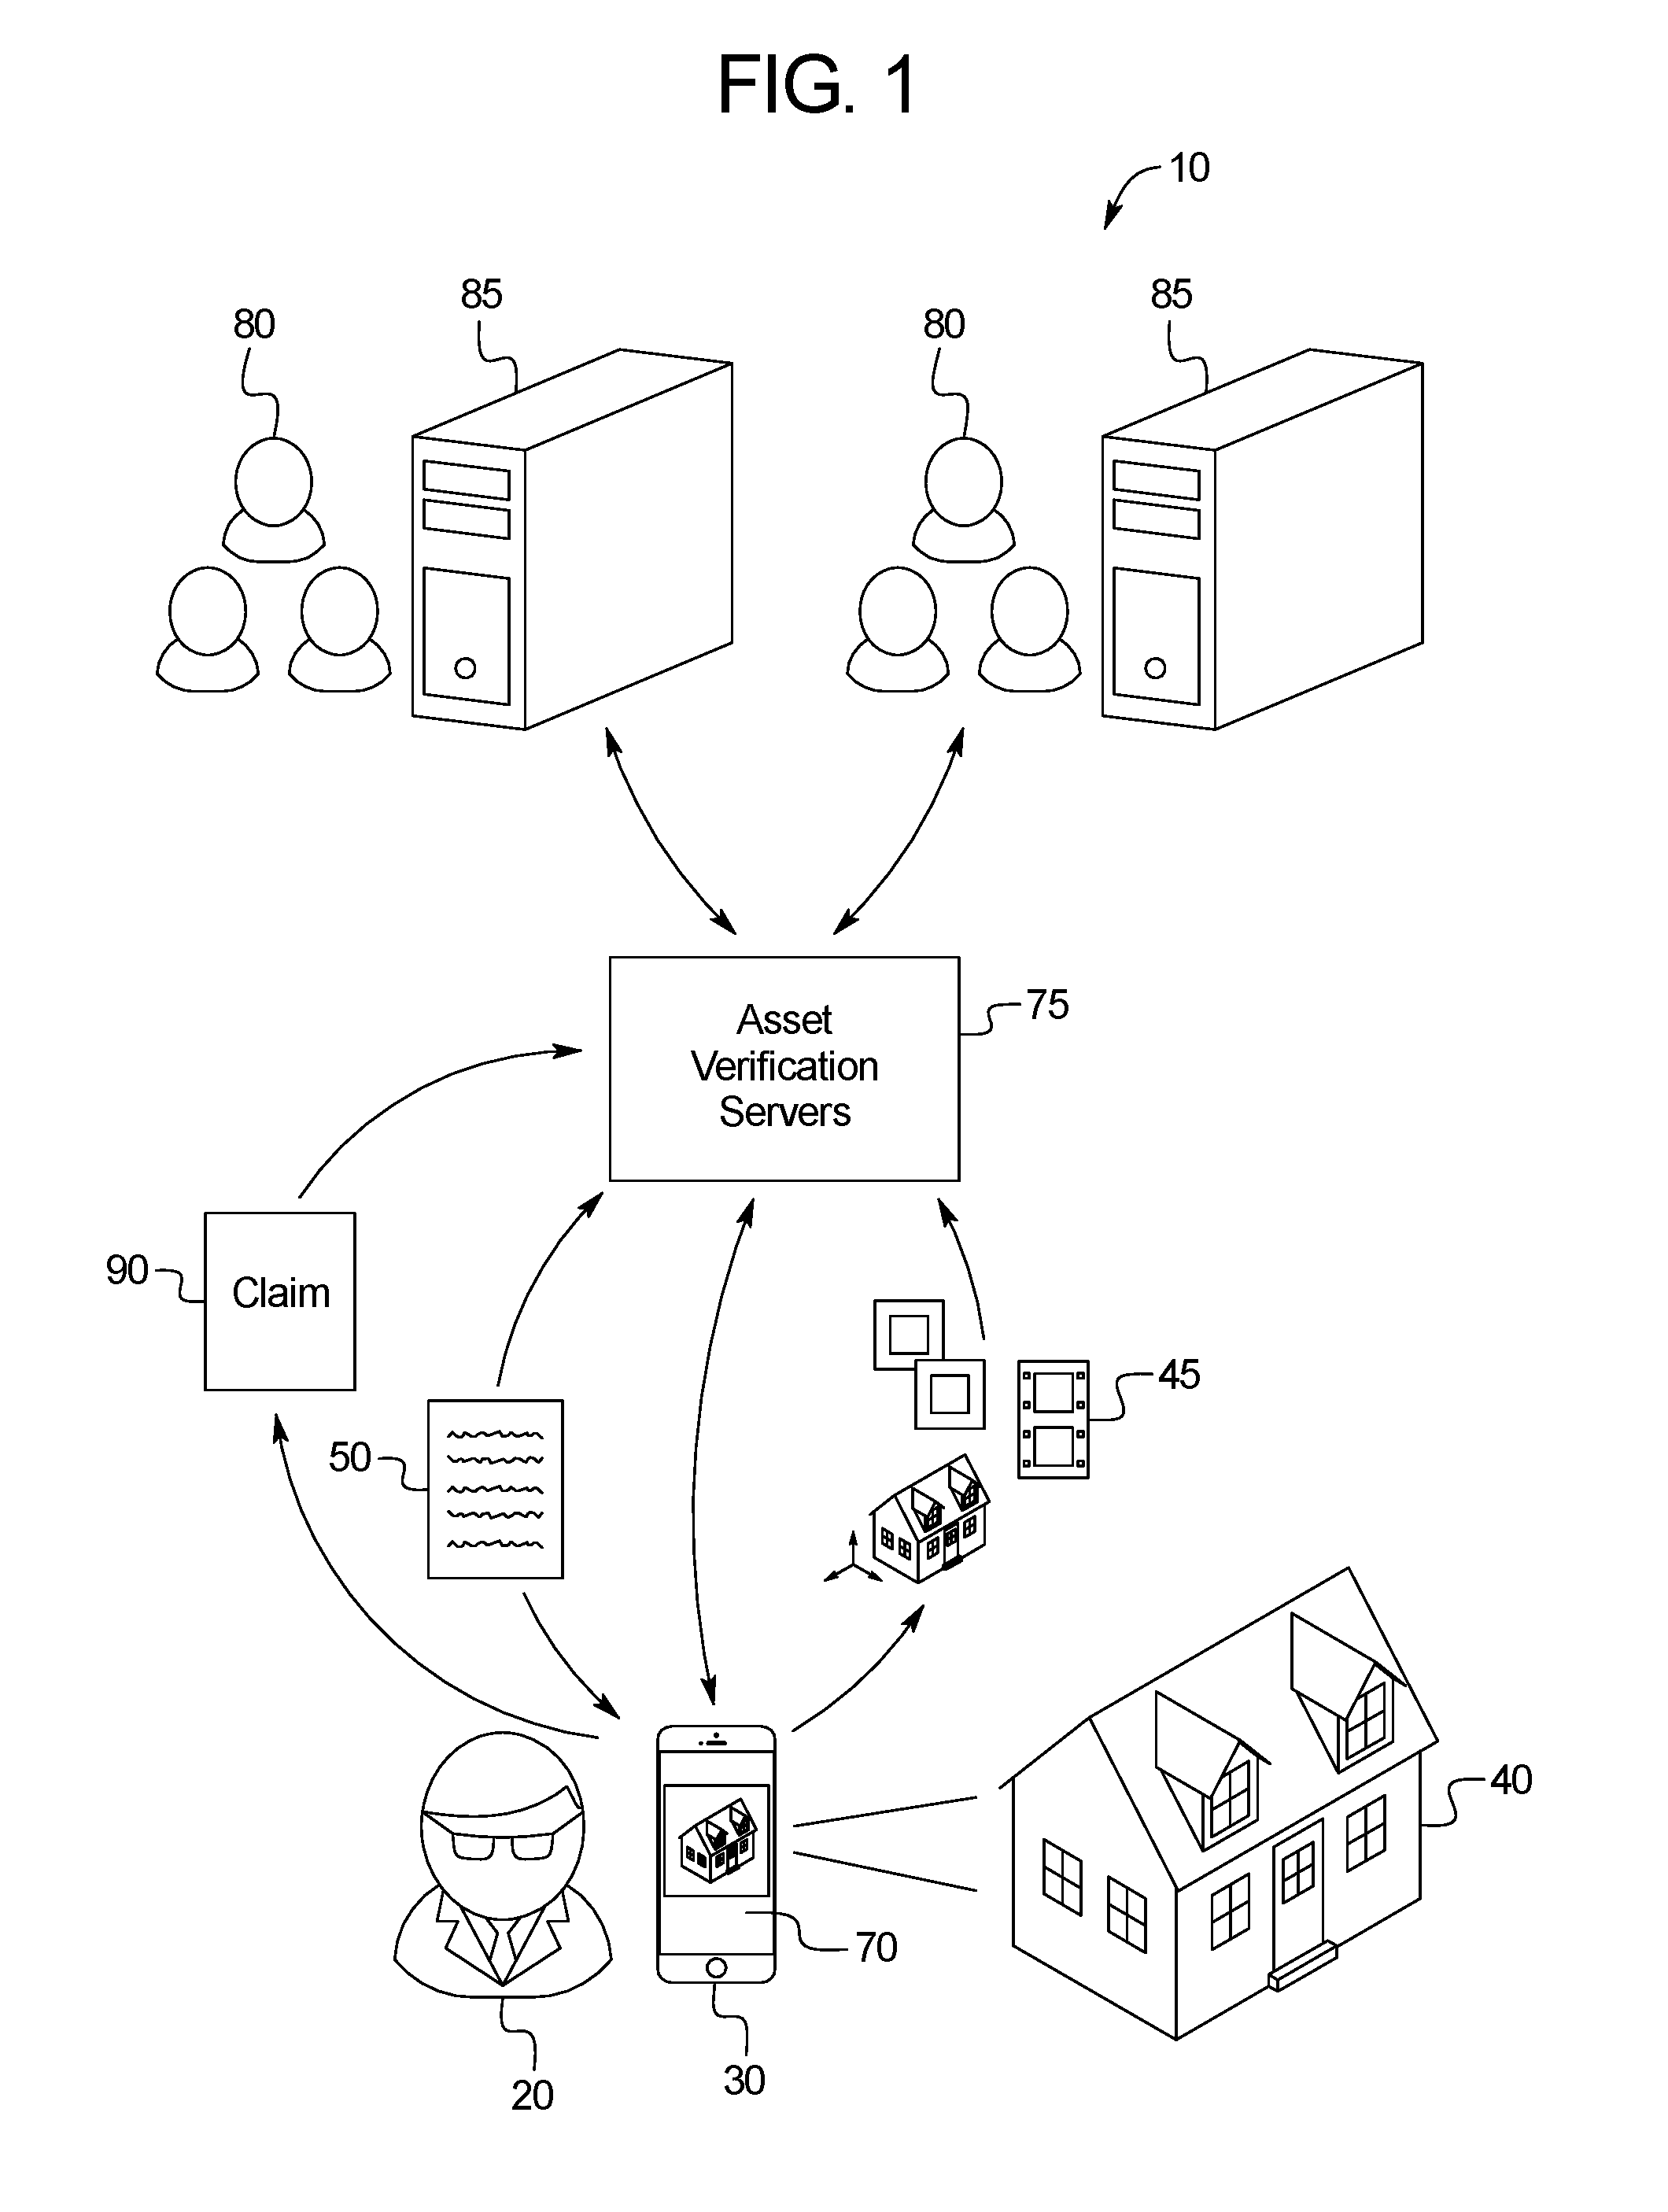 Insurance Asset Verification and Claims Processing System